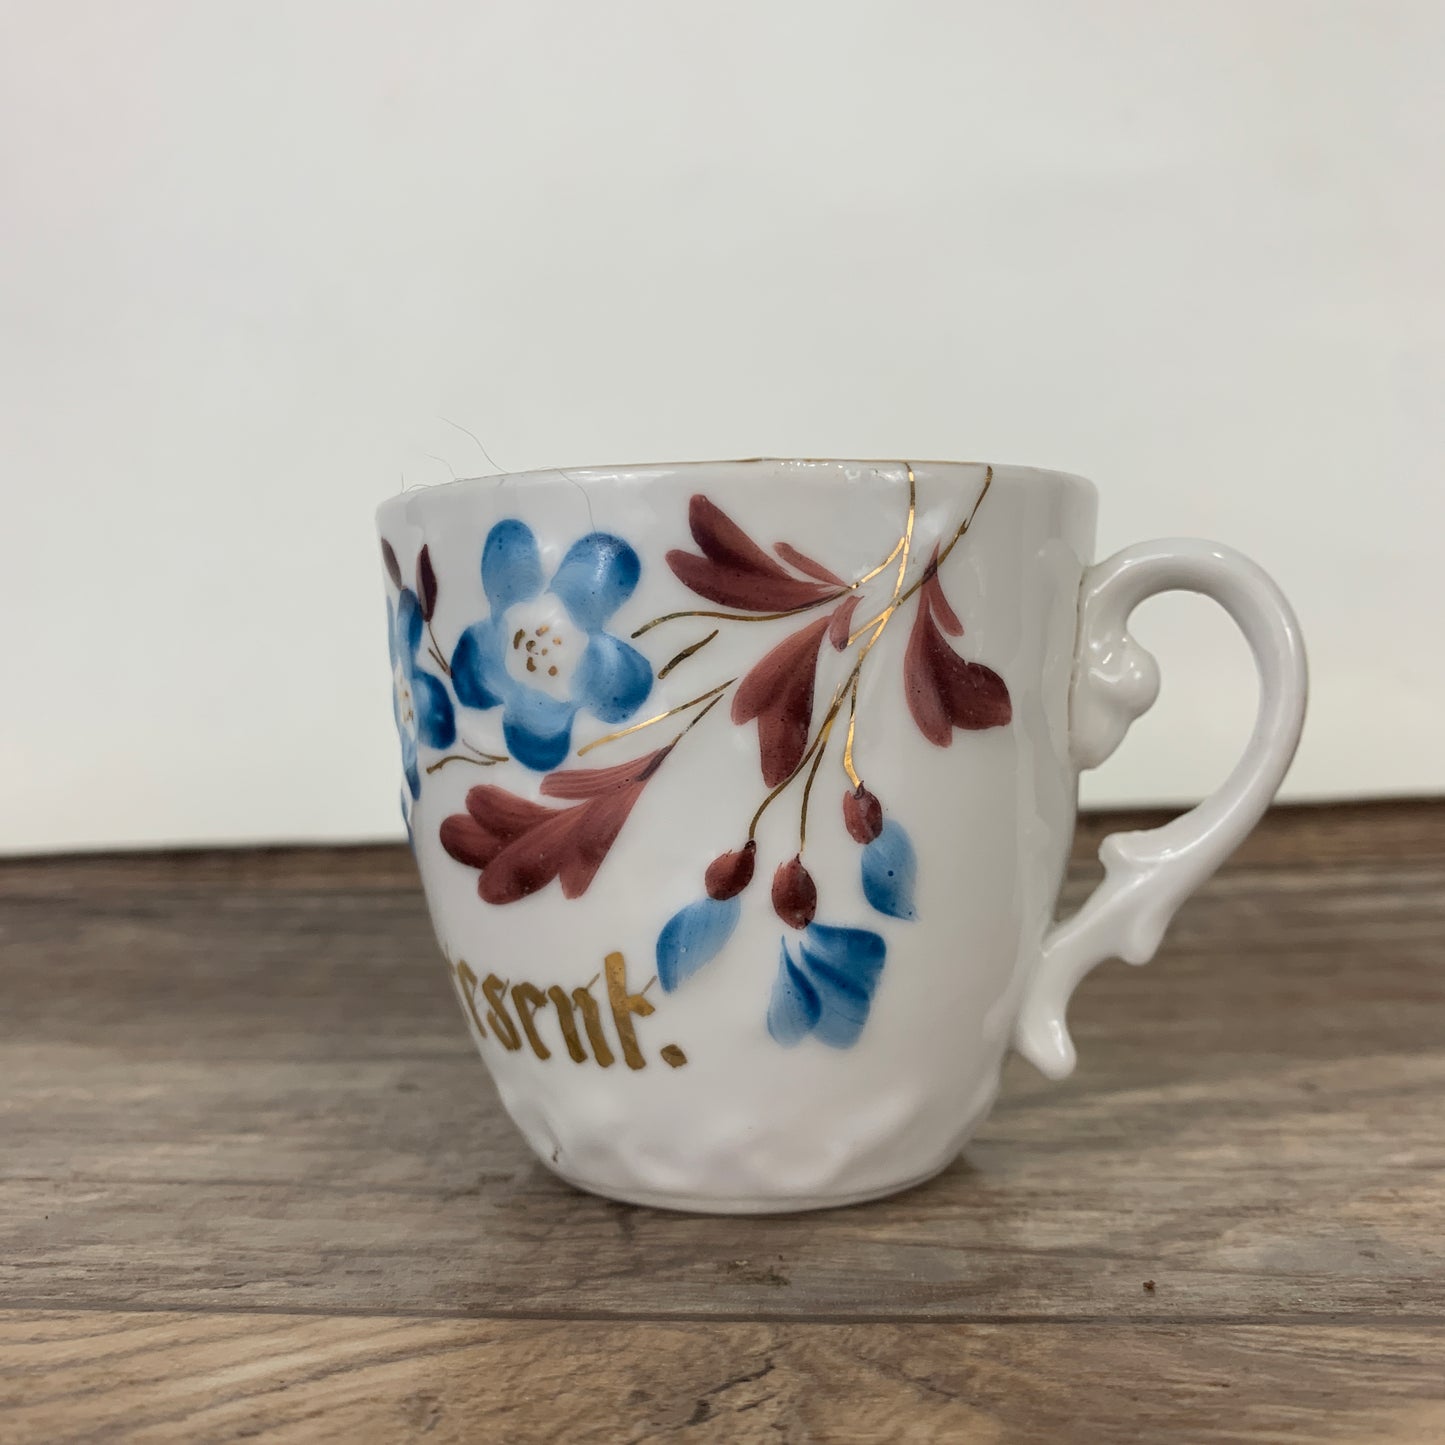 Antique Porcelain Cup, Made in Germany, Small Hand Painted Cup